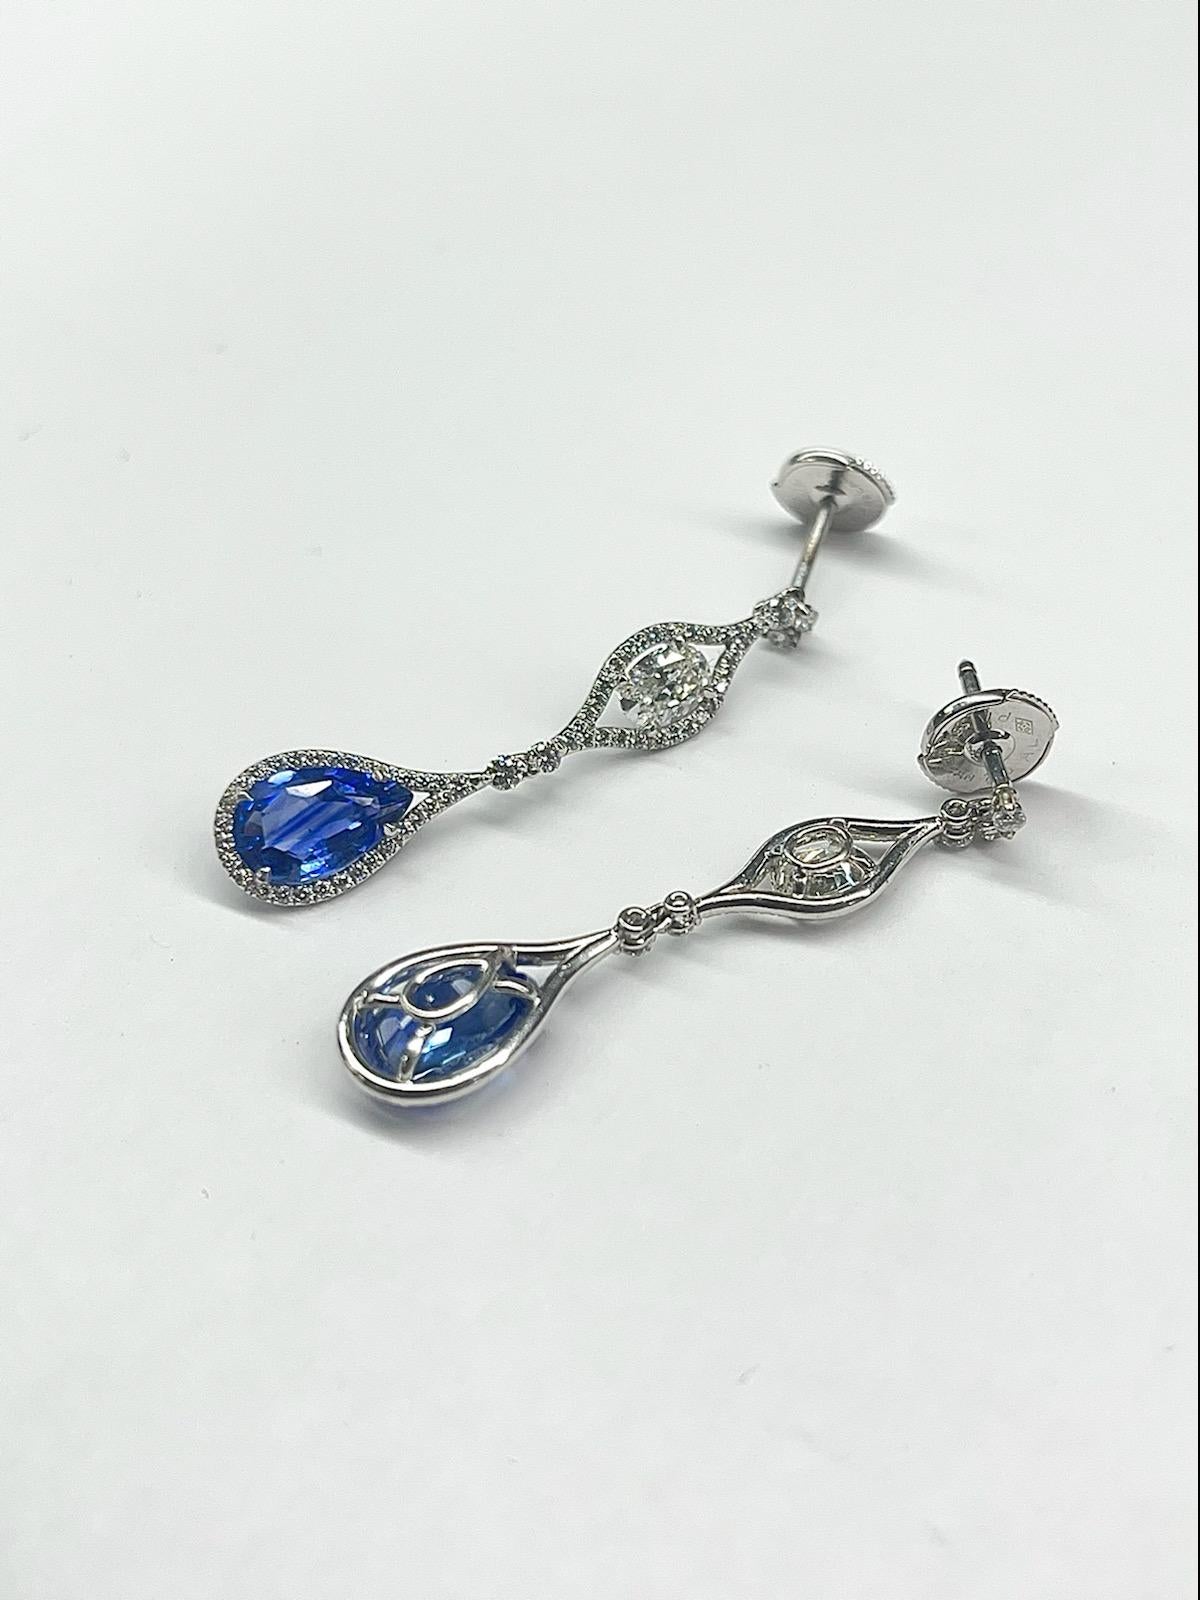 You can't go wrong these beautiful pear shaped blue sapphire earrings! 
Wear them out for a special occasion or give them as an amazing gift! 
Two (2) Pear Shape Blue Sapphires weigh  3.84cts Total 
2.19 Carats of Round Brilliant Cut Diamonds - All